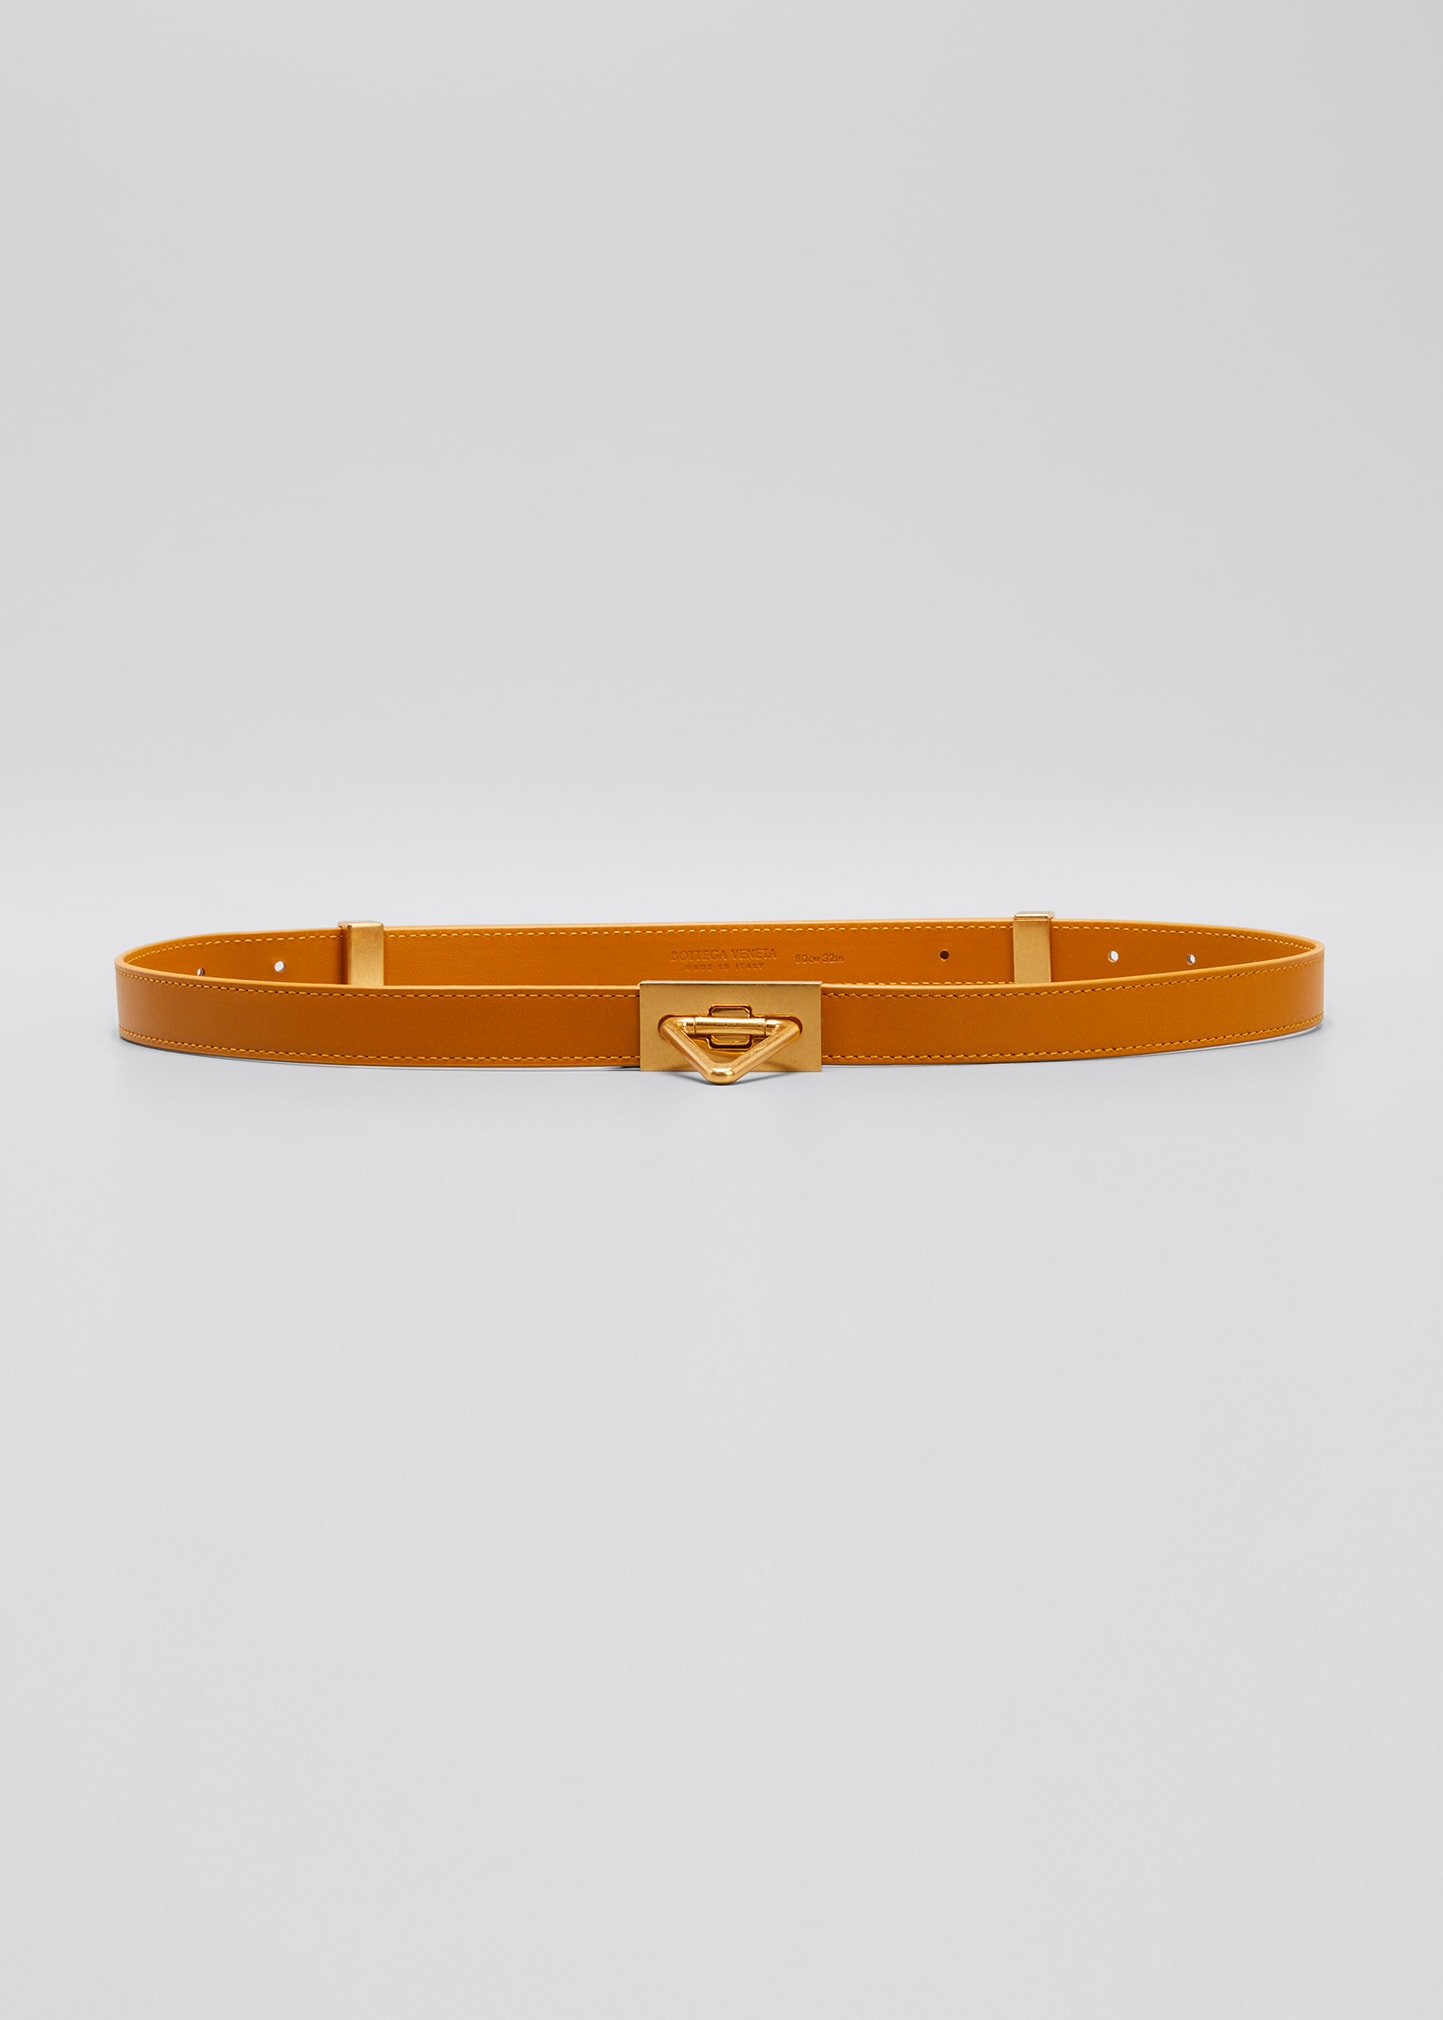 Leather belt with turn lock instead of buckle (inspired by Hermes